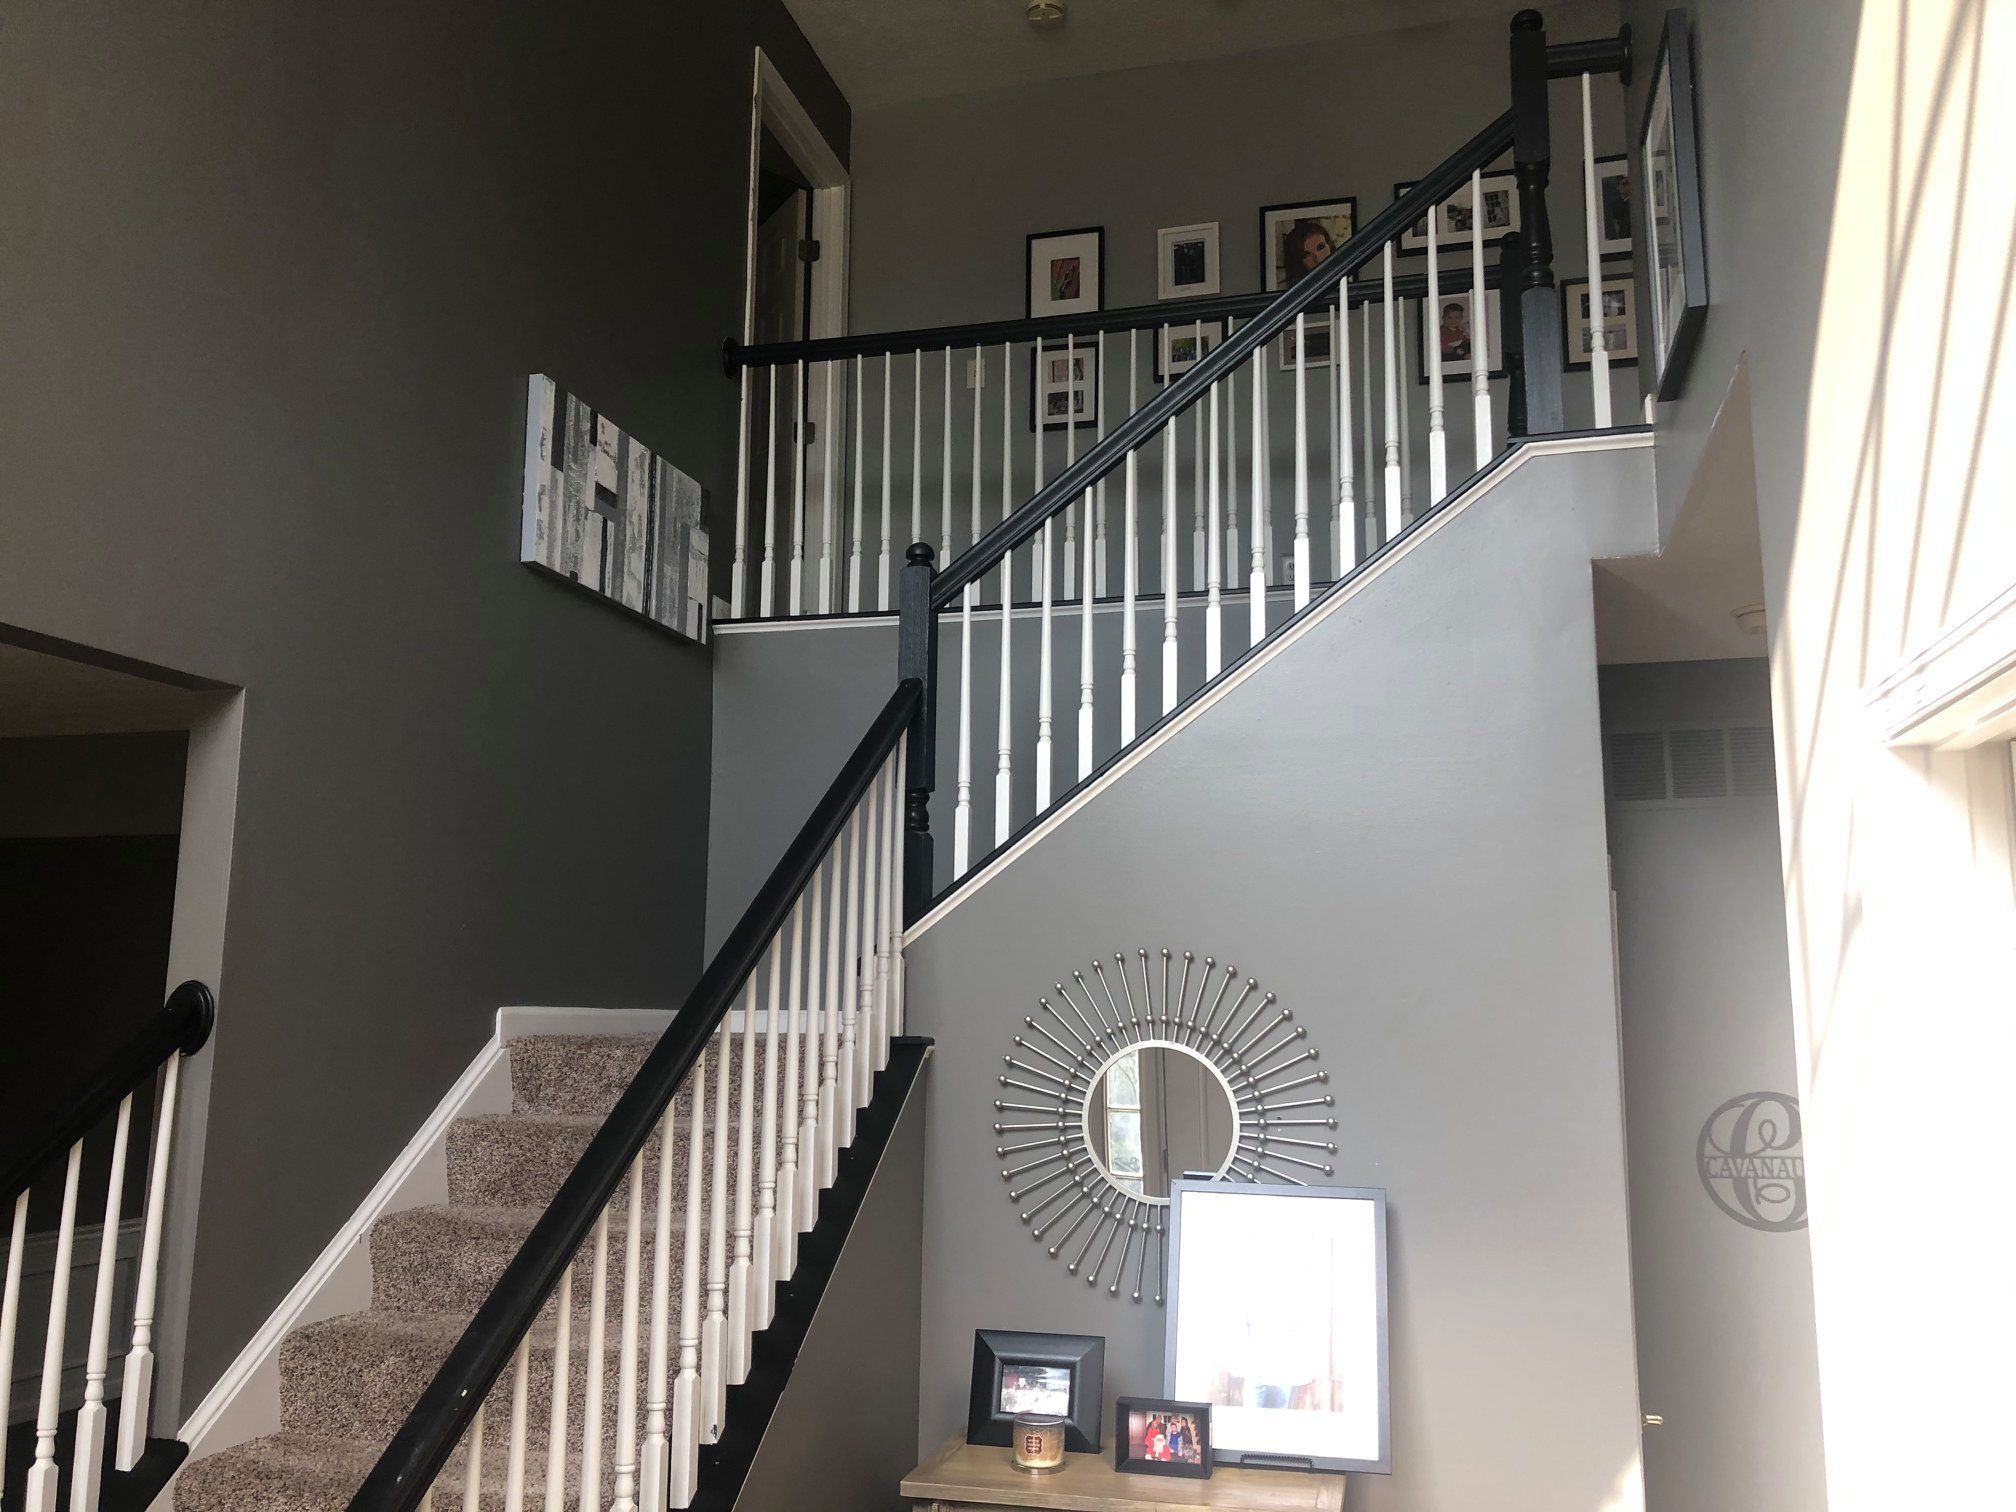 Our experienced and detail-oriented interior painters will work with you to create a look that perfectly suits your home. We take care to ensure that each and every detail is accounted for, so you can rest assured that your painting project will be handled with the utmost care and professionalism. for Cavanaugh Painting Inc in Springboro, OH